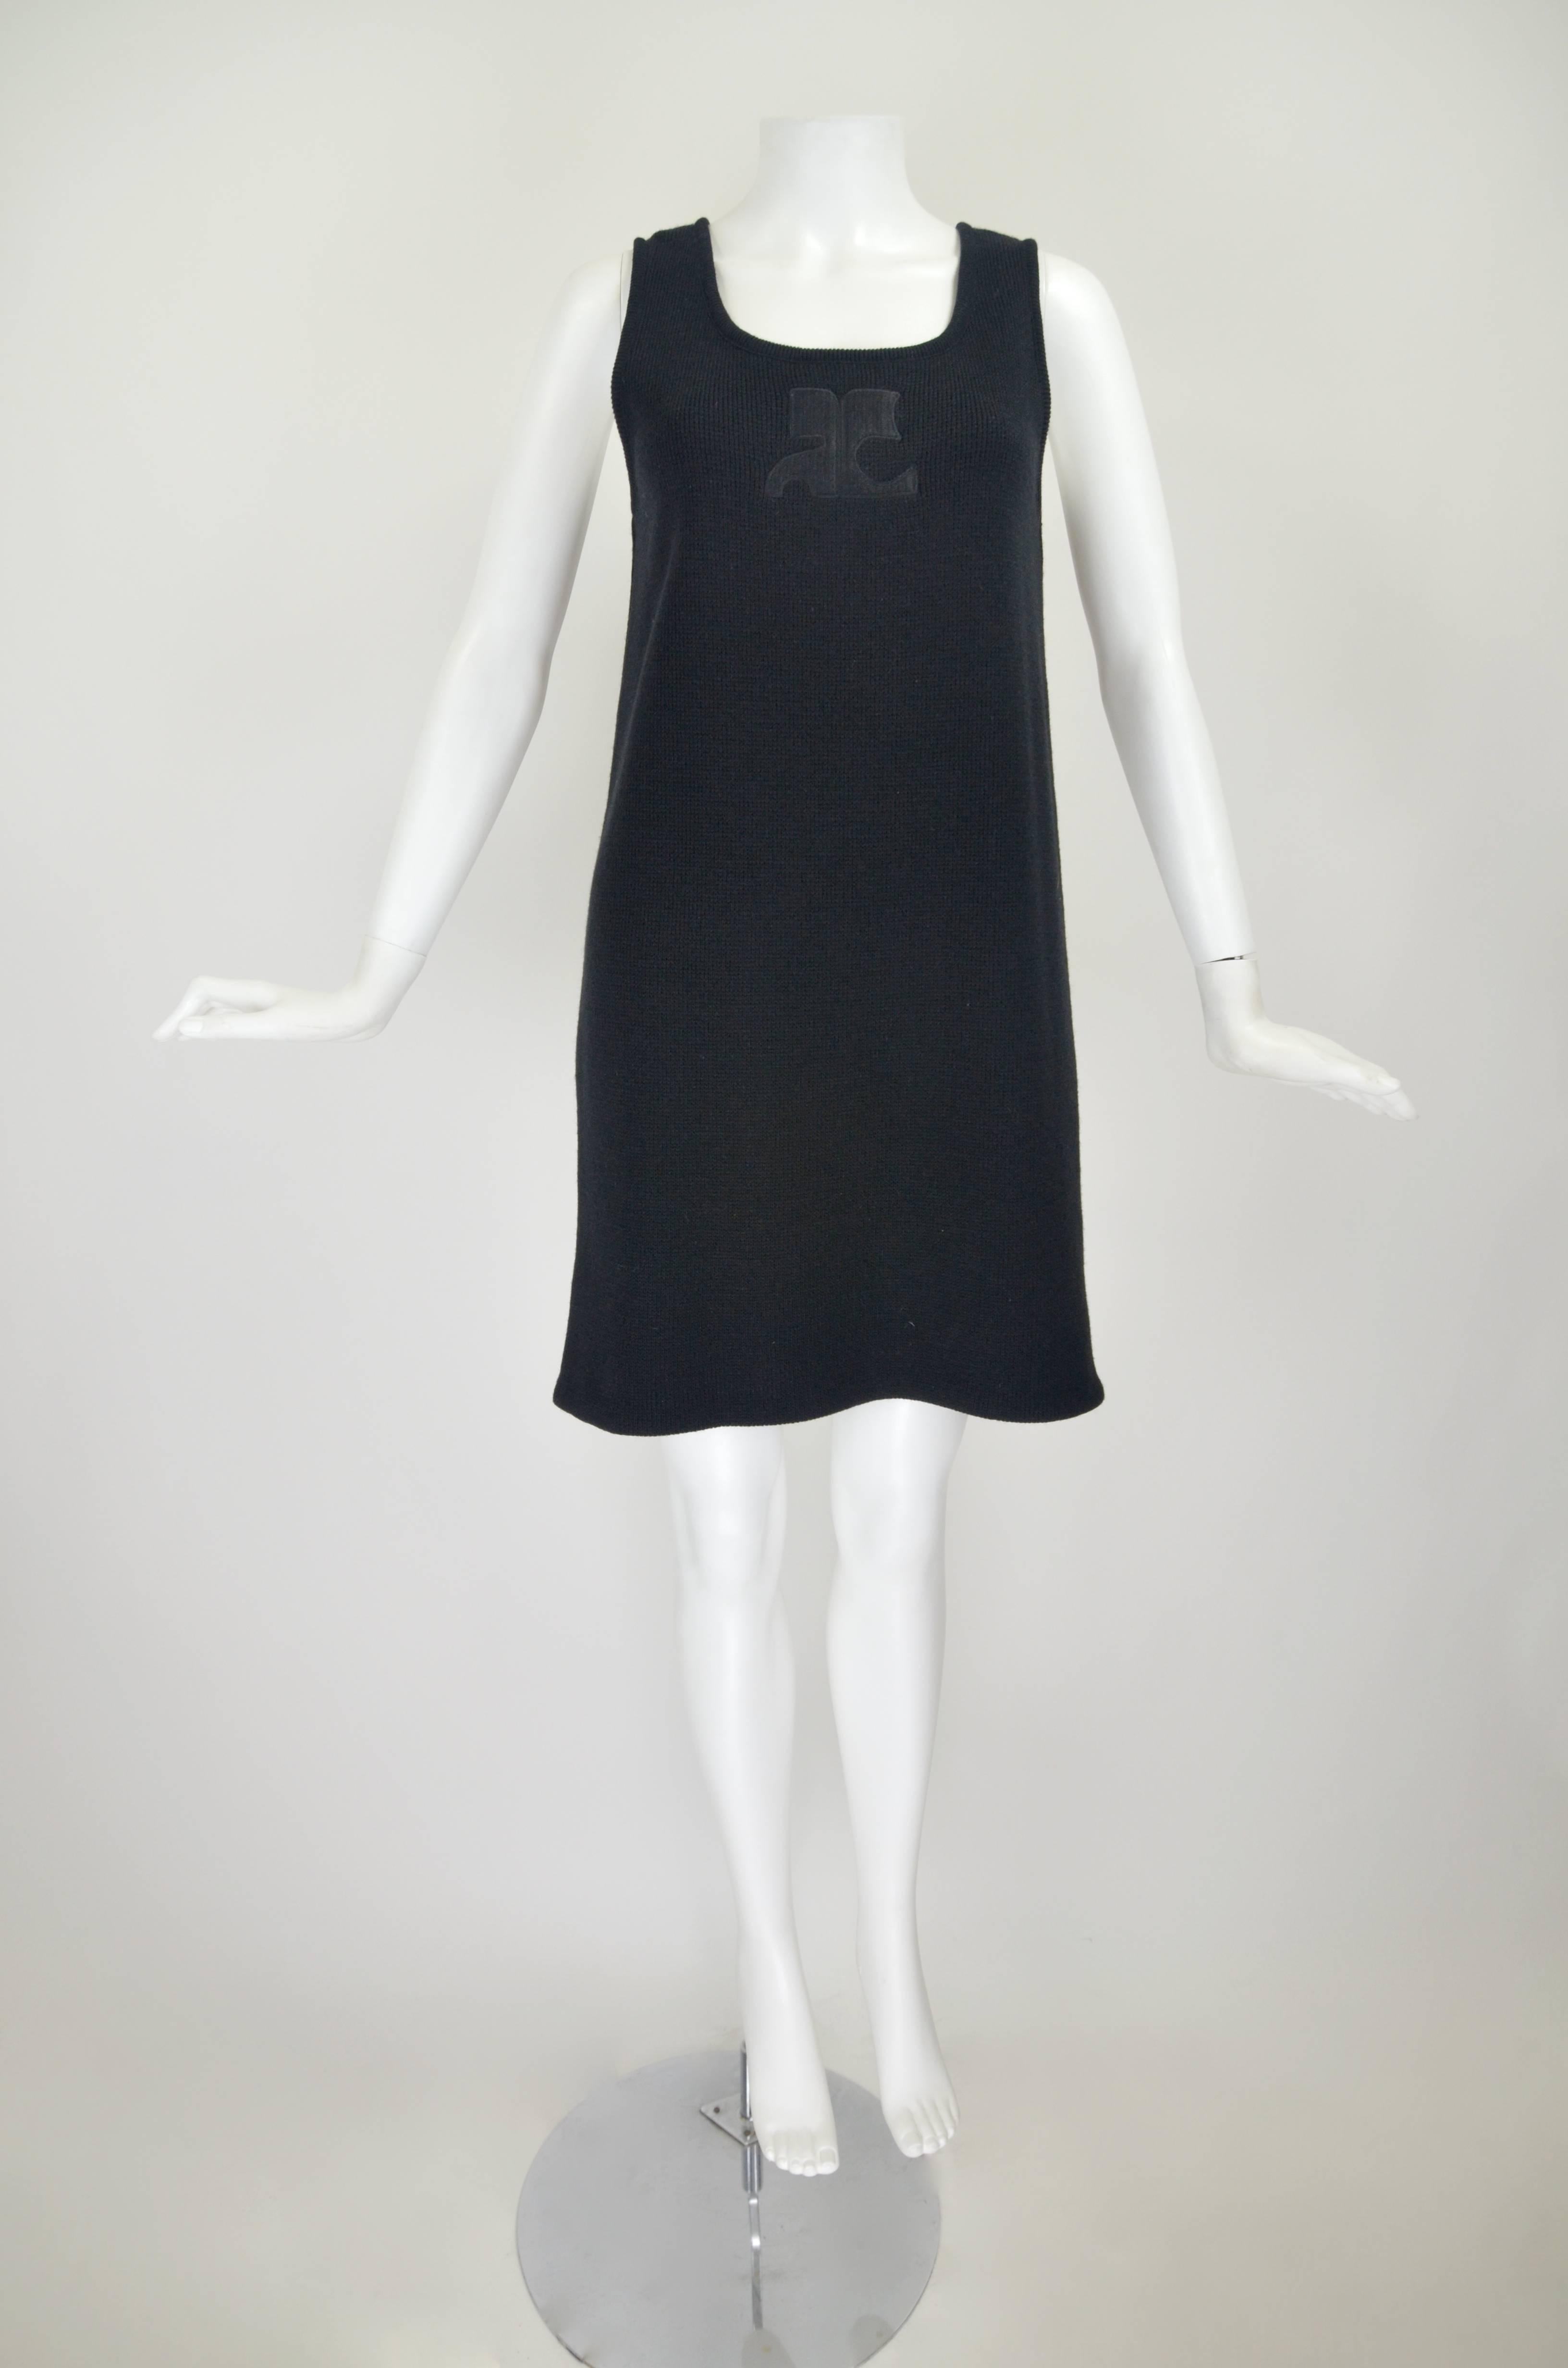 1990s Courreges Black Knit Wool Dress with Iconic Logo

Measurements--
Bust: 34 inches
Waist: up to 35 inches
Hip: up to 37 inches
Length, Shoulder to Hem: 34 inches